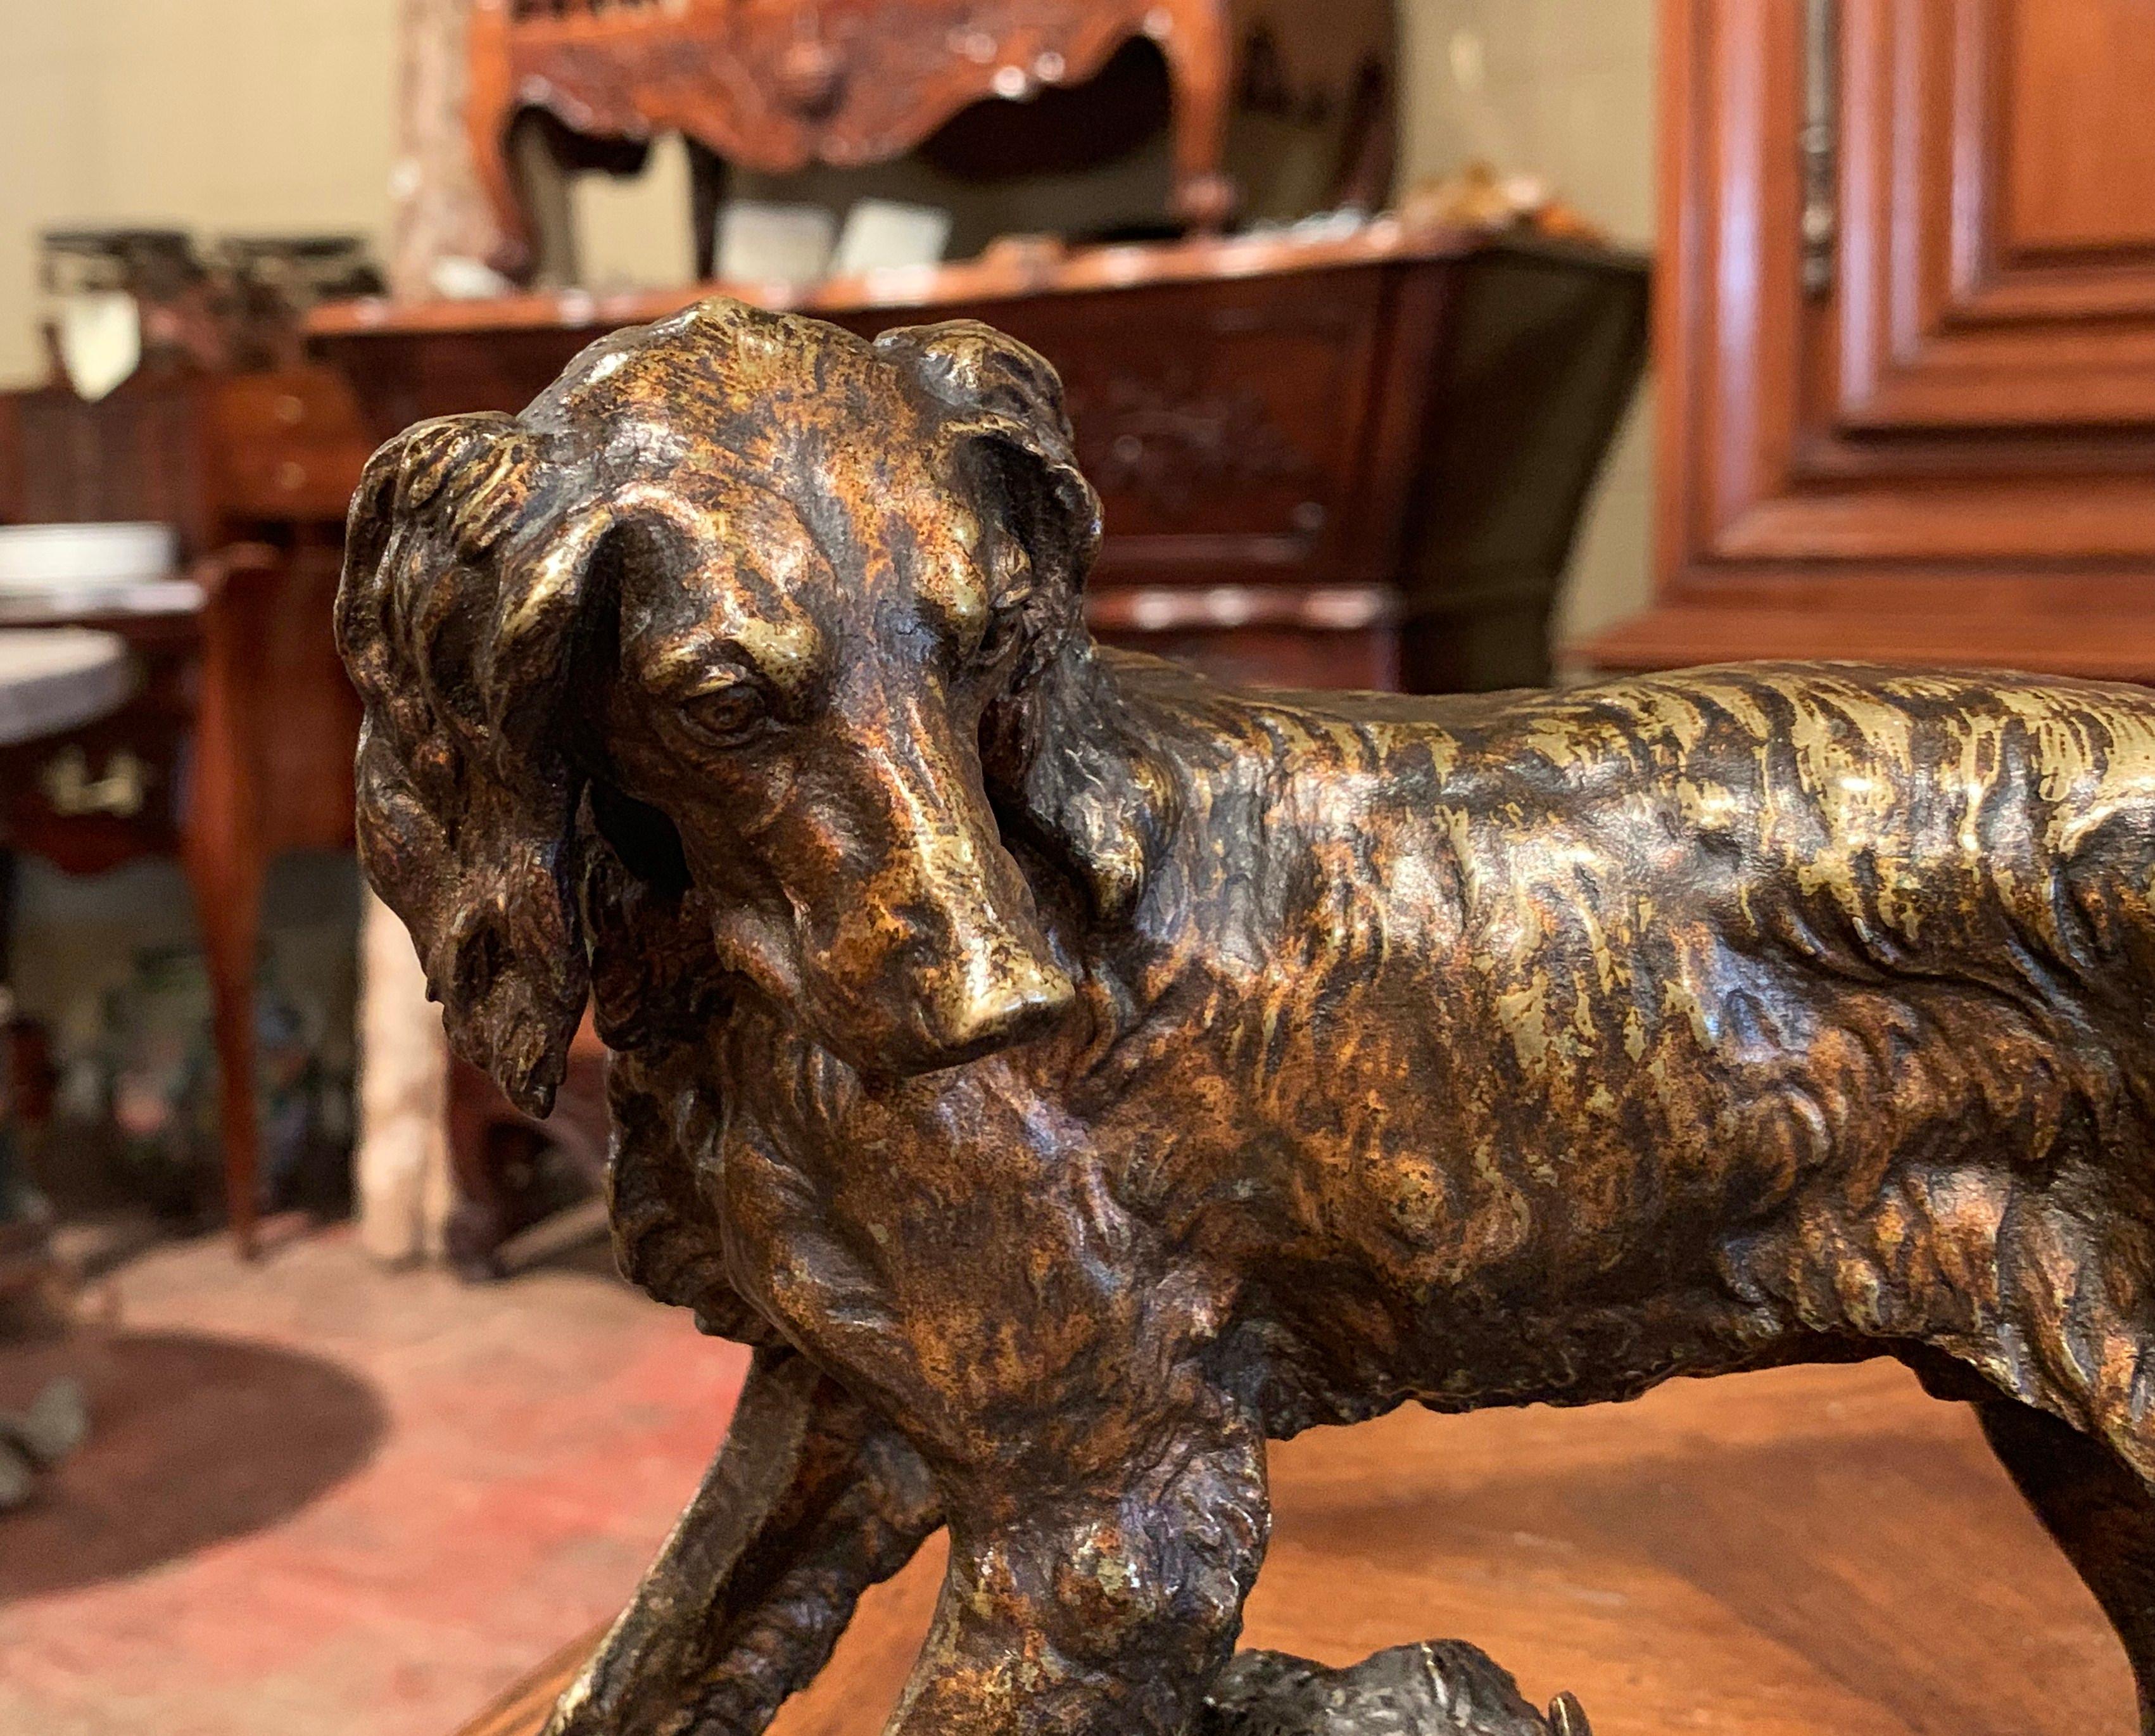 This antique bronze sculpture was created in France, circa 1870. The composition features a setter standing on rocky ground with leaf and branch decor and looking to the side. The hunting dog figure is signed on the front, Jules Moigniez. The